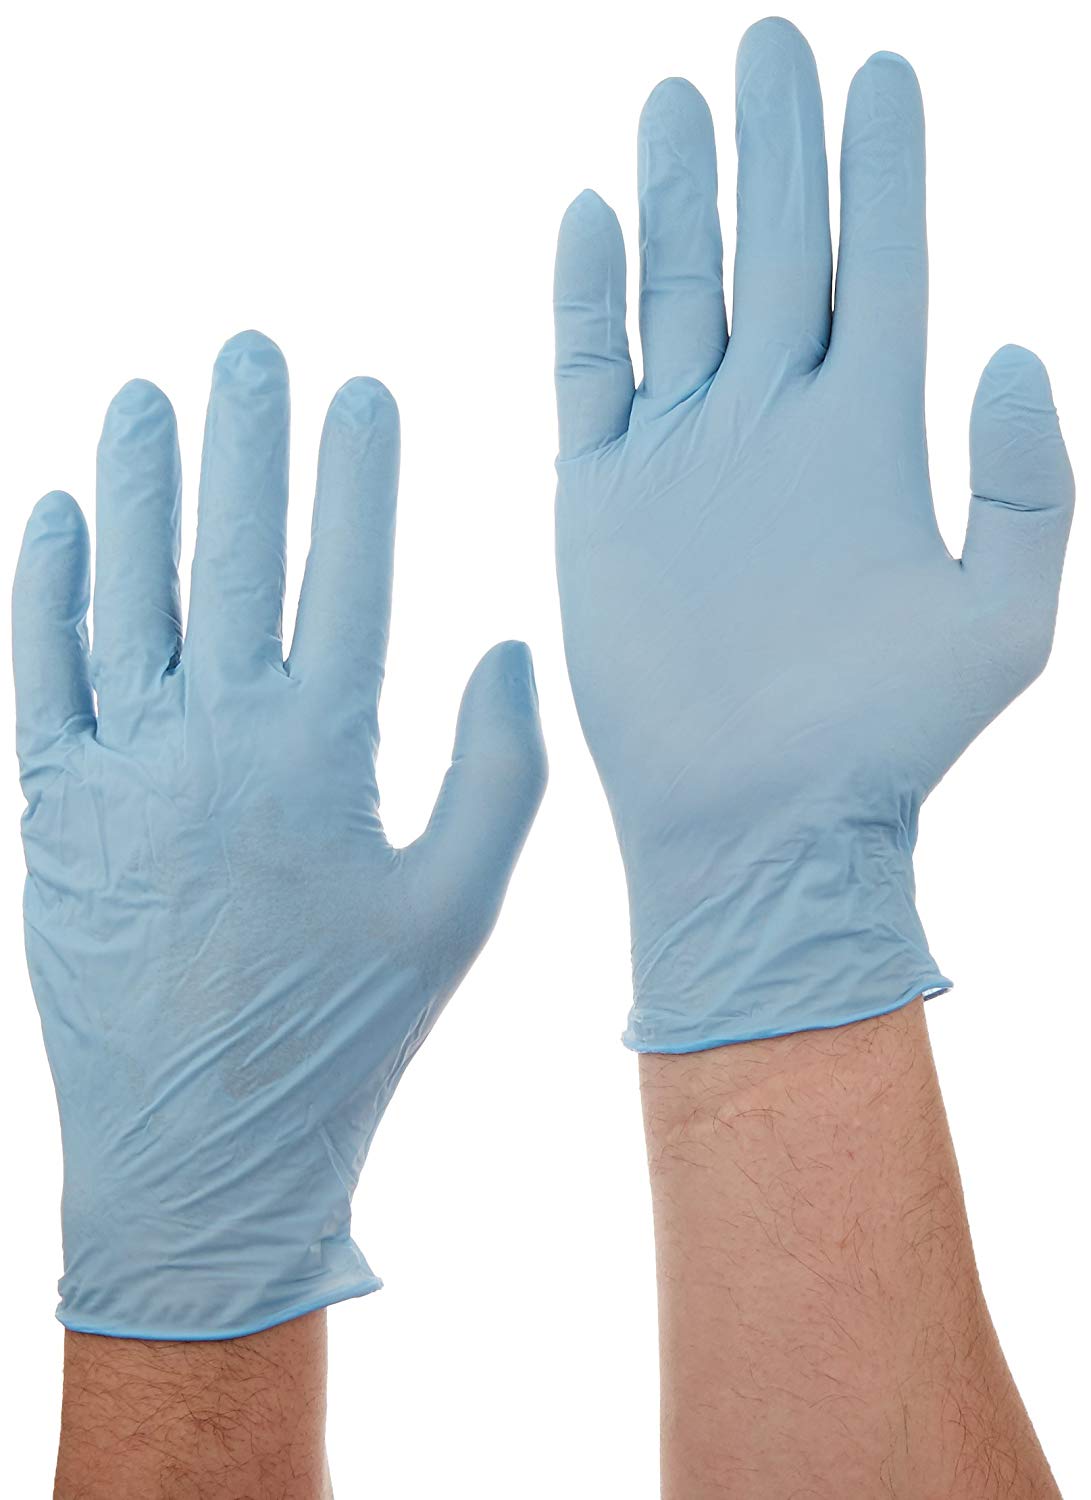 Ambitex Gloves Nitrile Powder Free 100 Count Ambitex Gloves Nitrile Powder Free 100 Count Gloves Ambitex - Americare Medical Supply